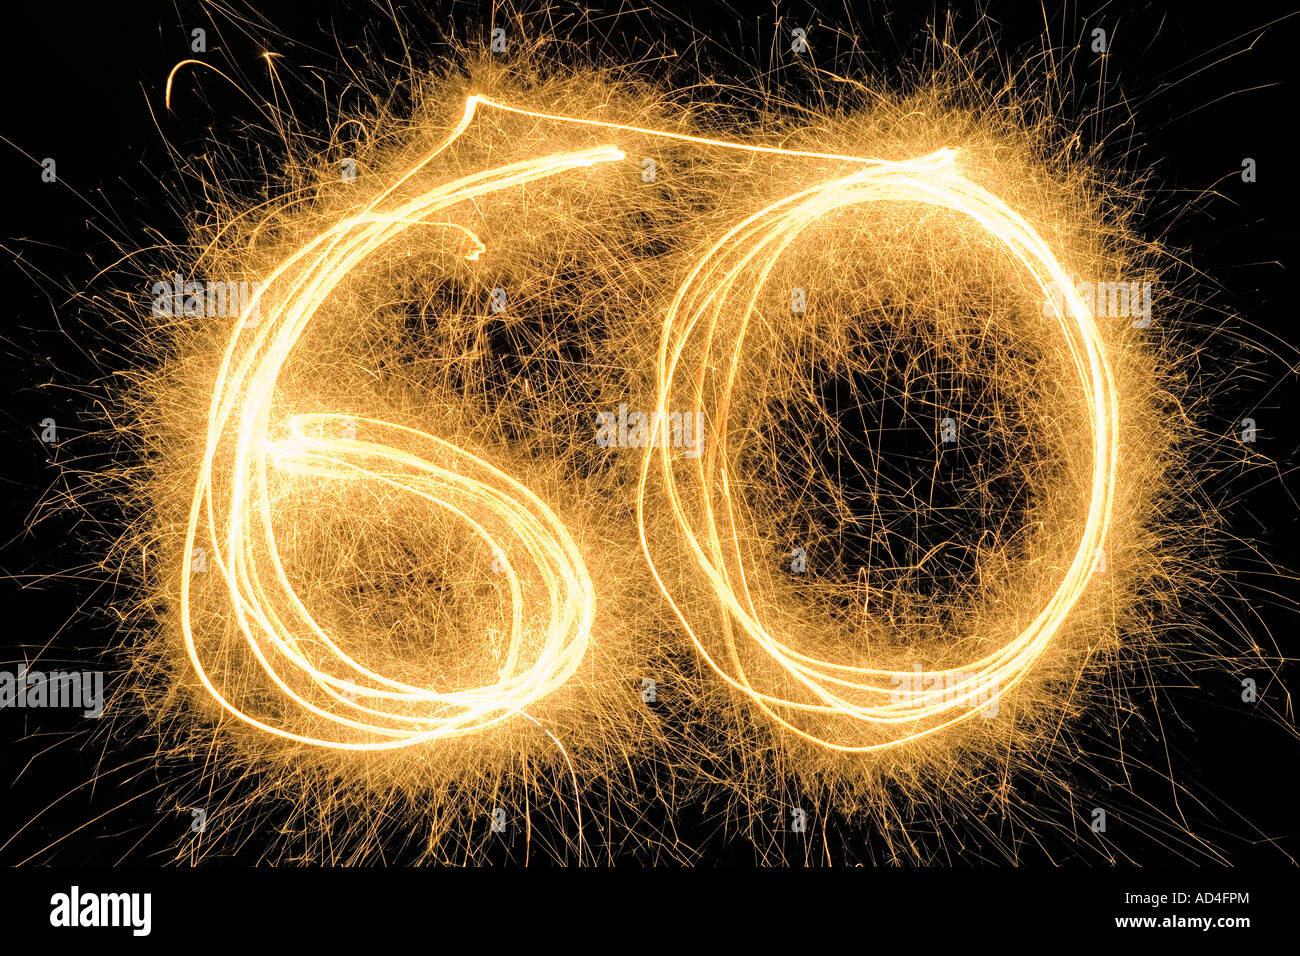 60' drawn with a sparkler Stock Photo